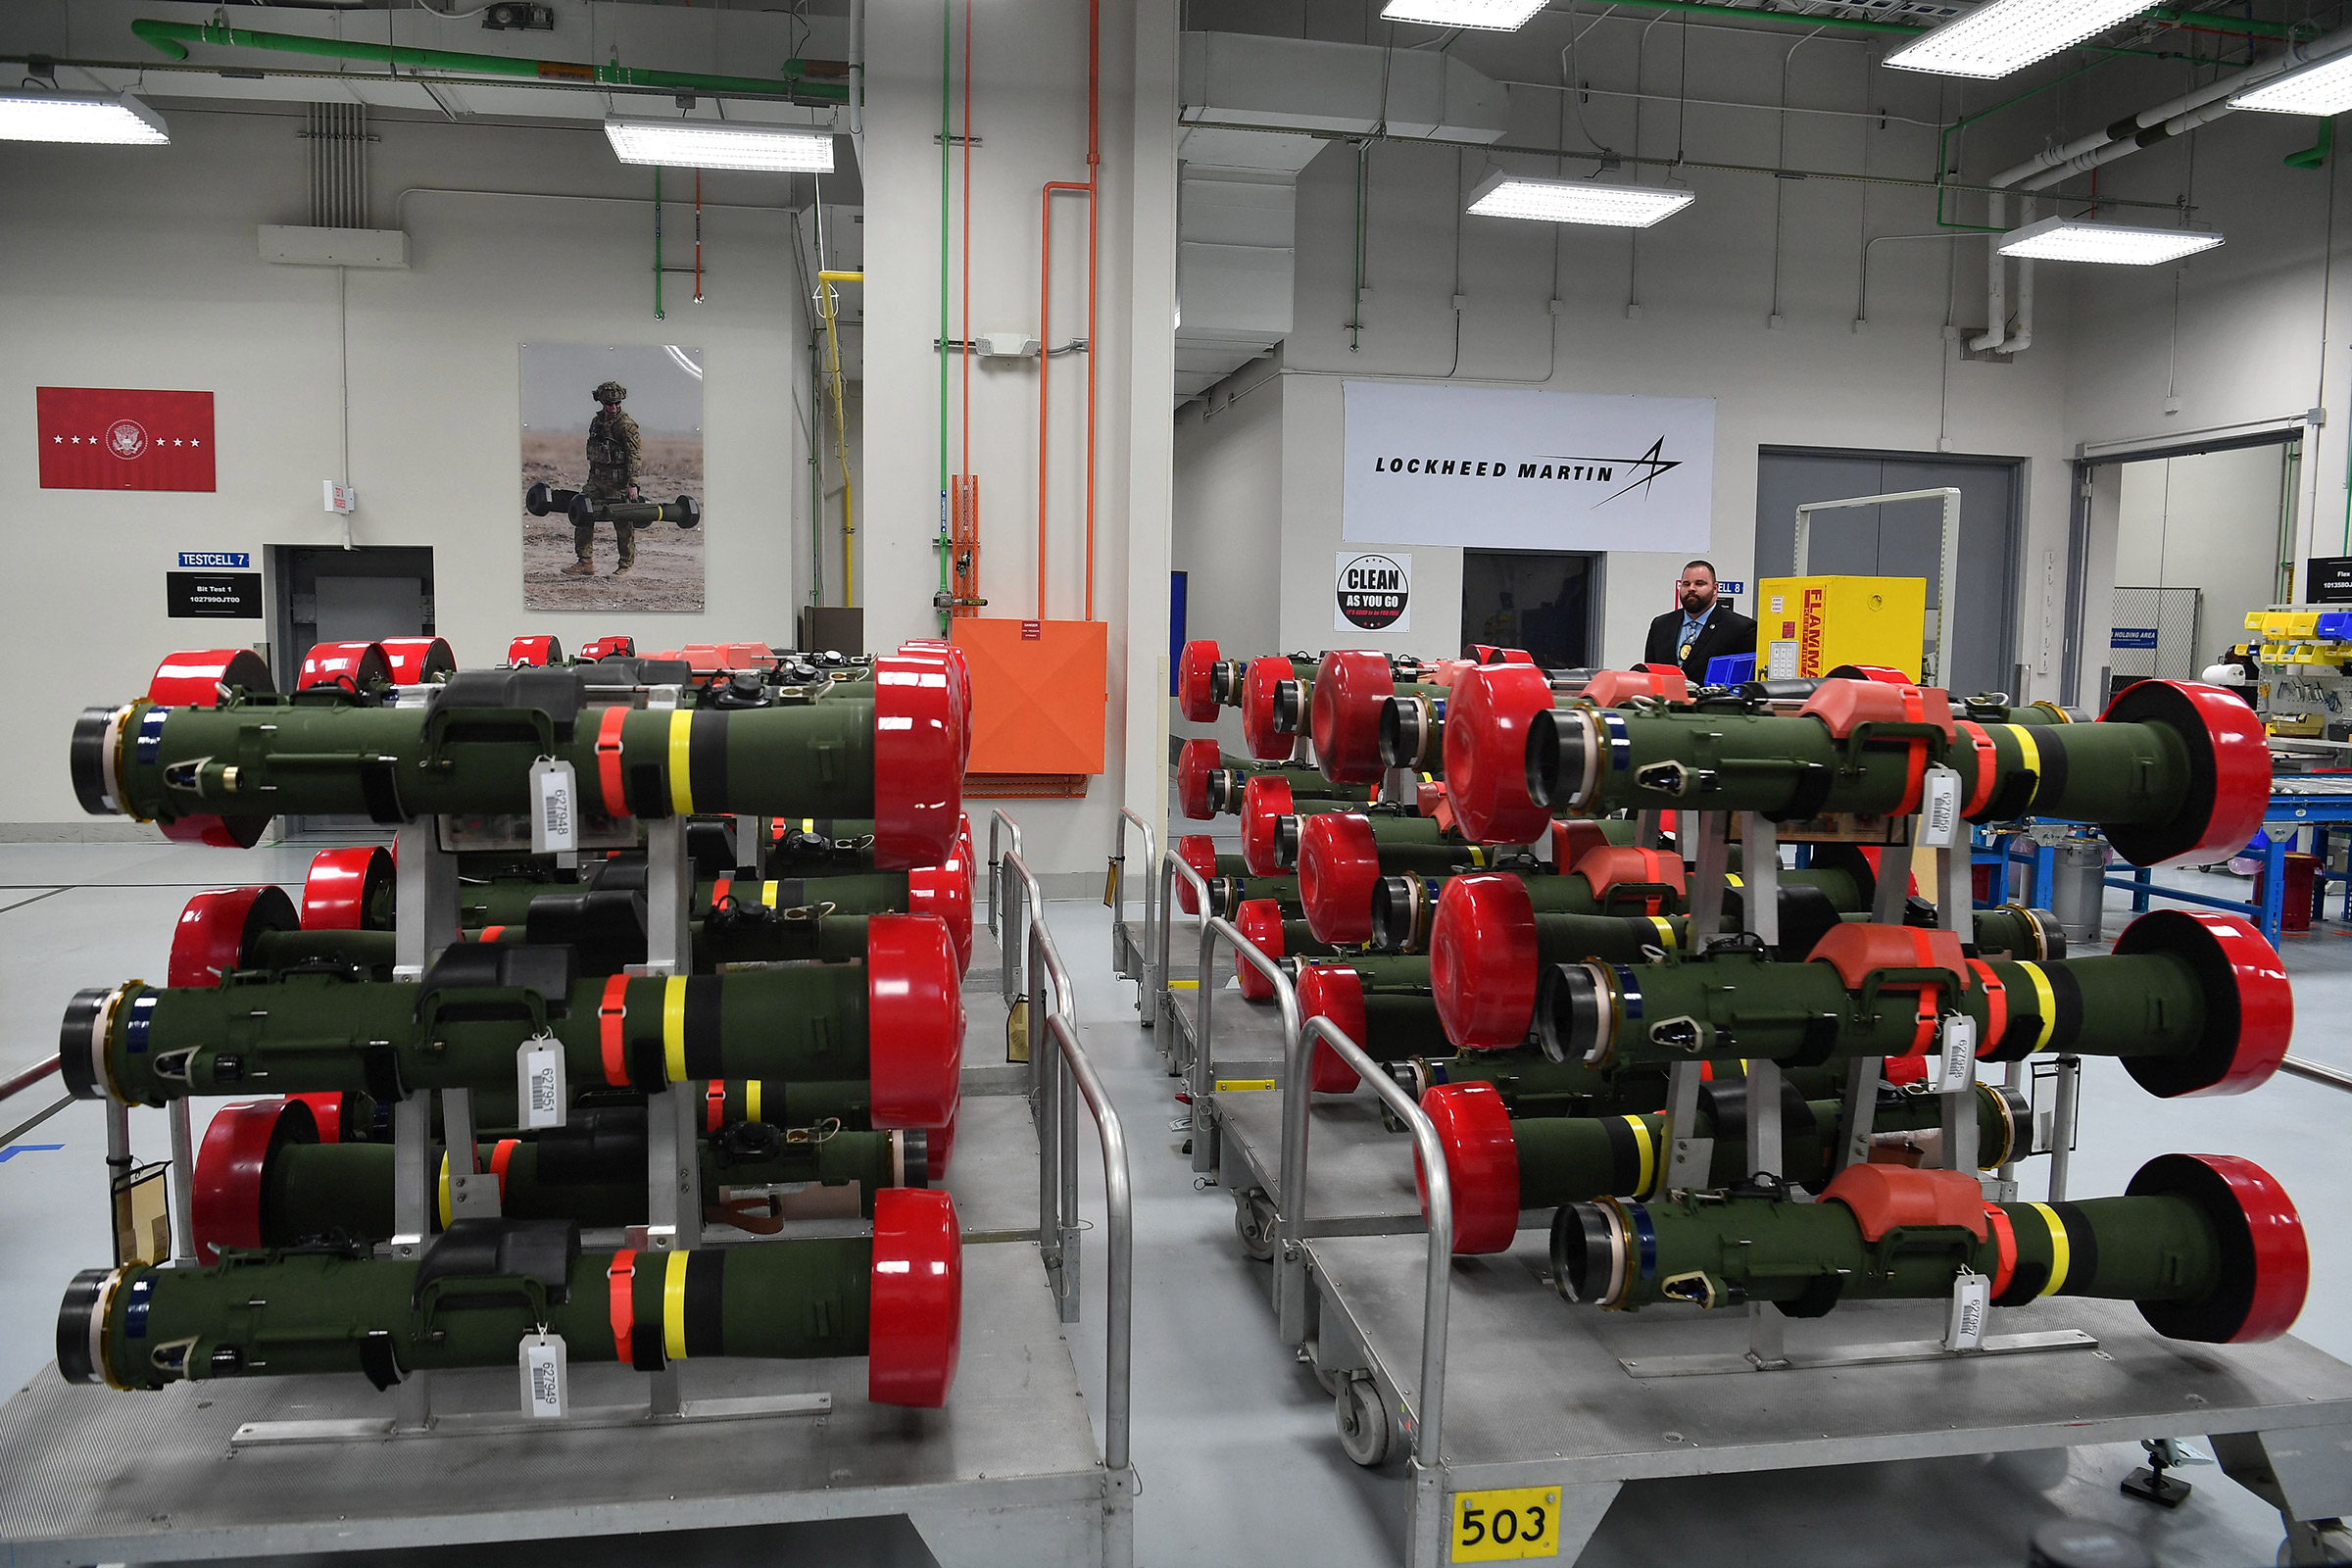 Javelin anti-tank missiles at the Lockheed Martin Pike County Operations facility in Troy, Ala., on May 3, 2022. (Nicholas Kamm—AFP/Getty Images)